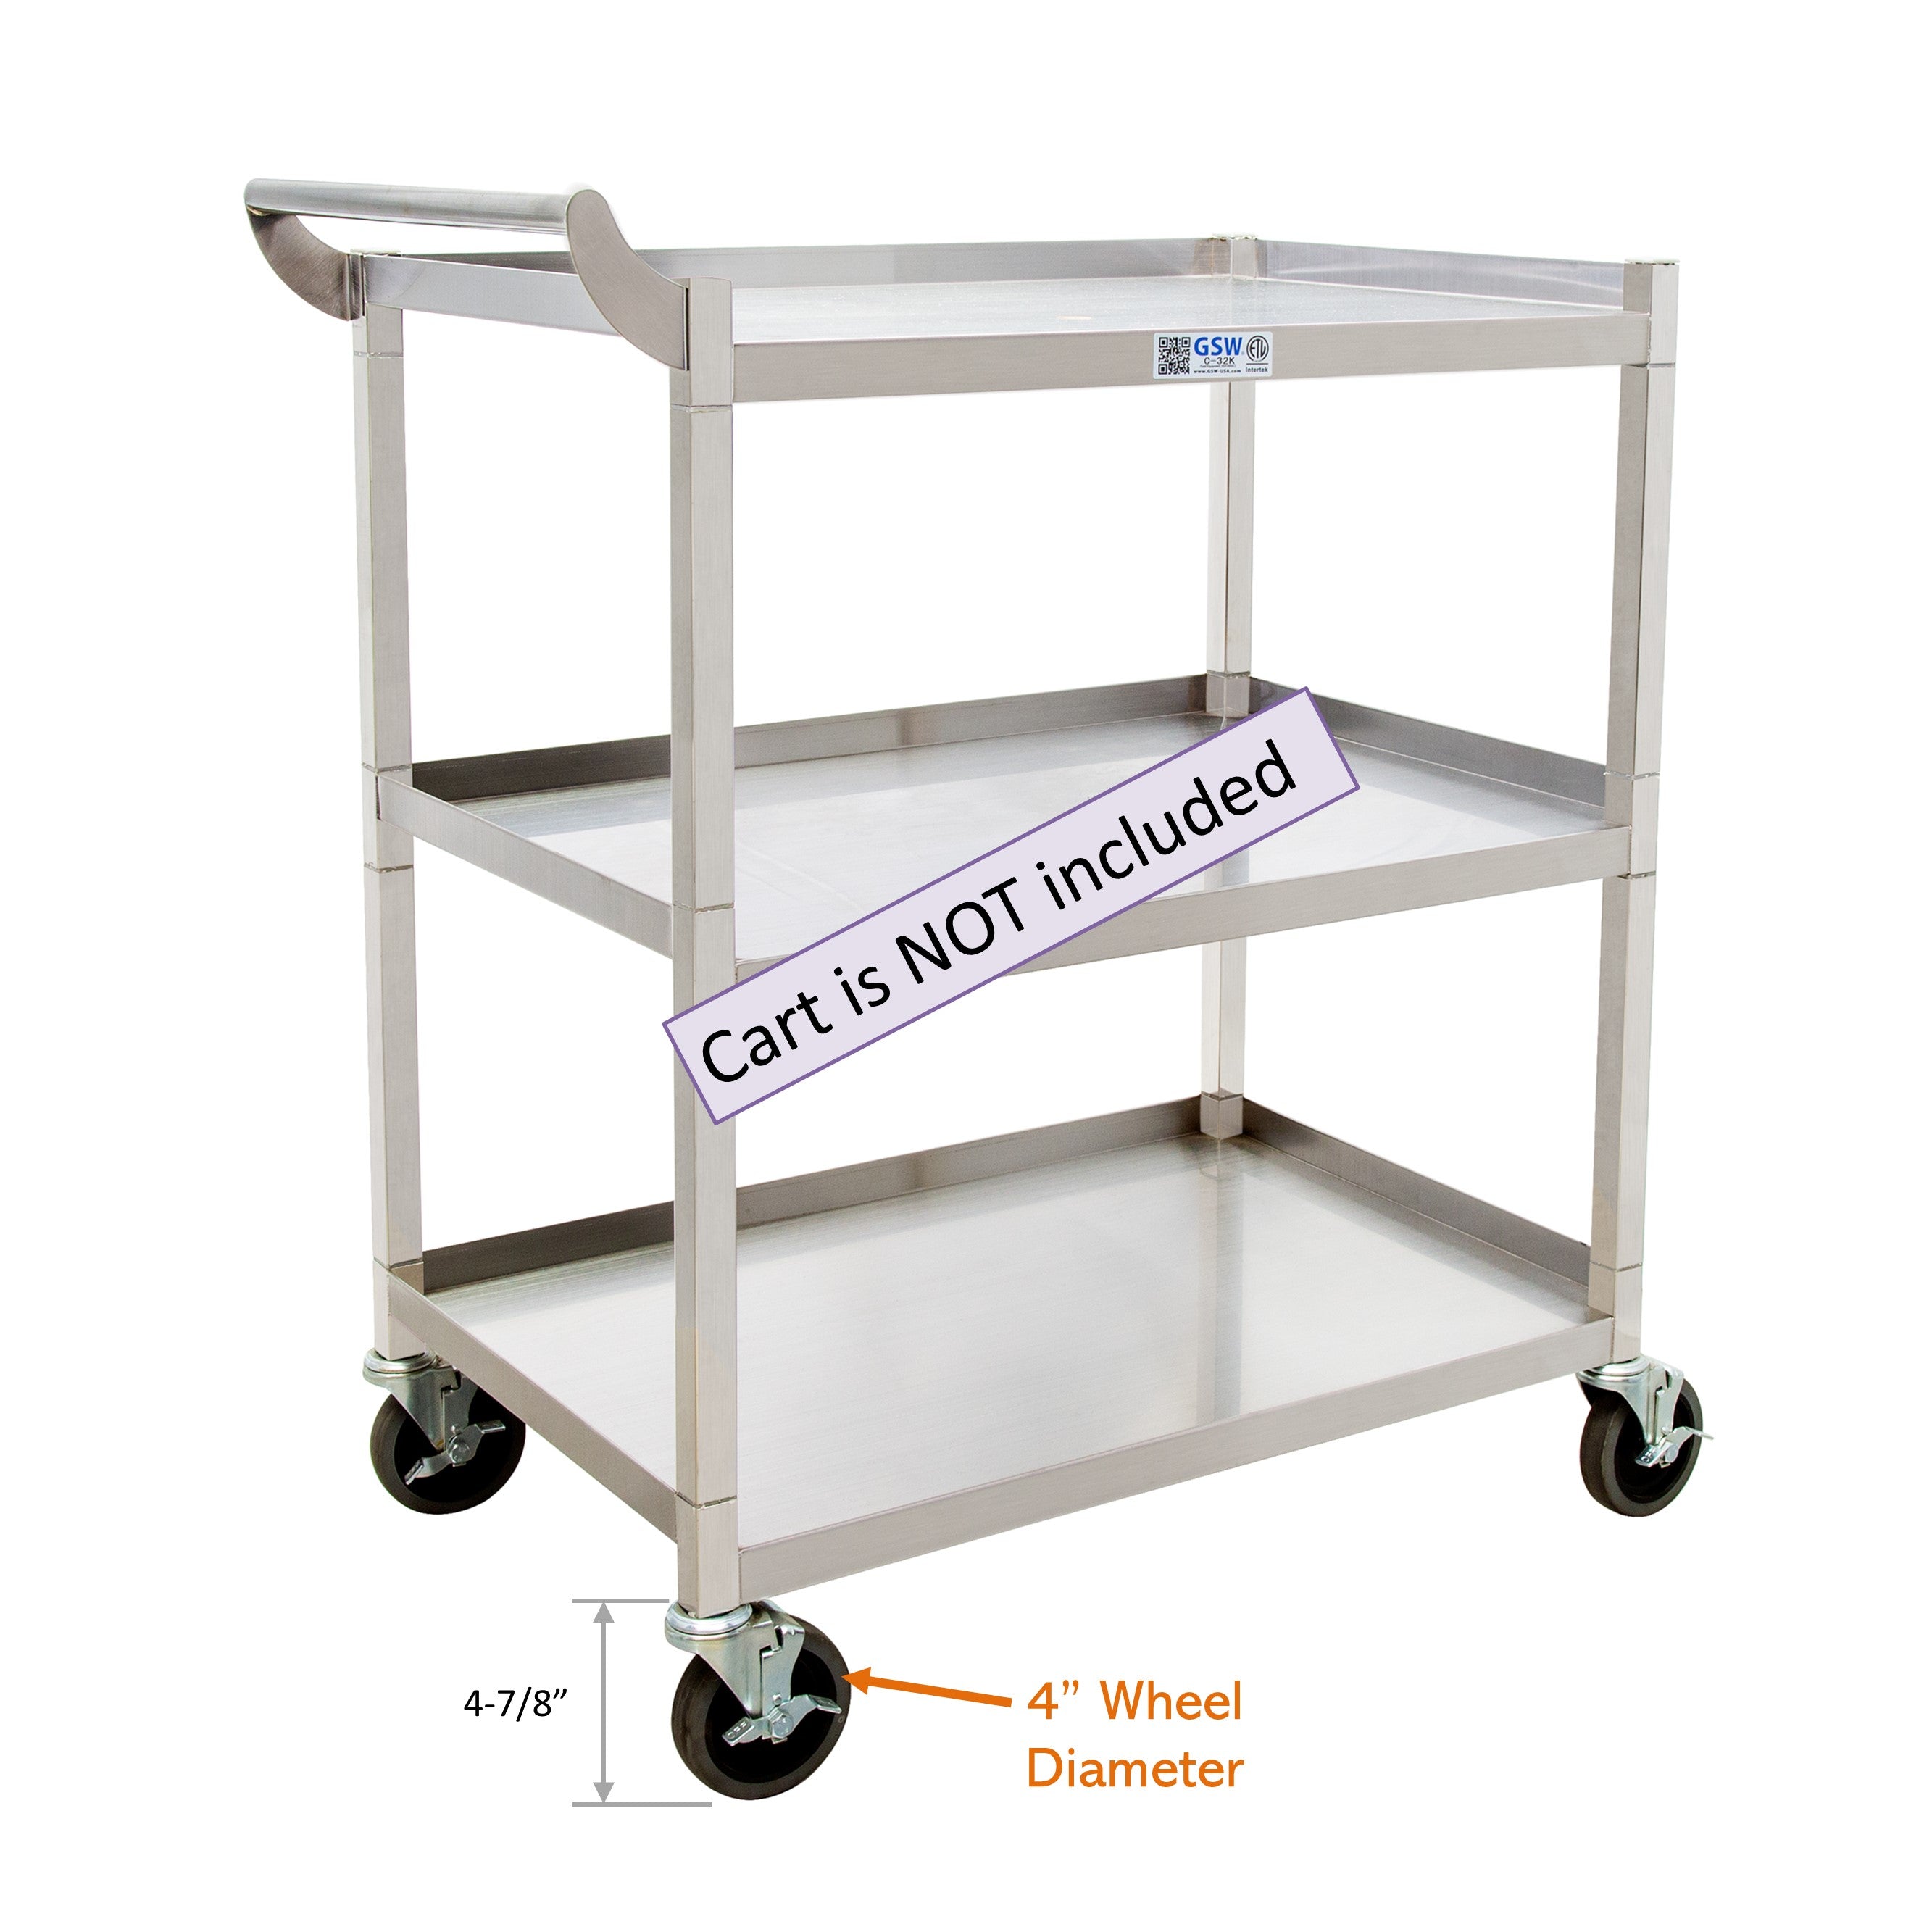 GSW 4" Square Stem Casters with Caster socket - Loading Capacity: 800 lbs; use for GSW Utility Carts (C-31K & C-32K), Service Carts, and Shelf Steel Carts (Swivel With Brake)